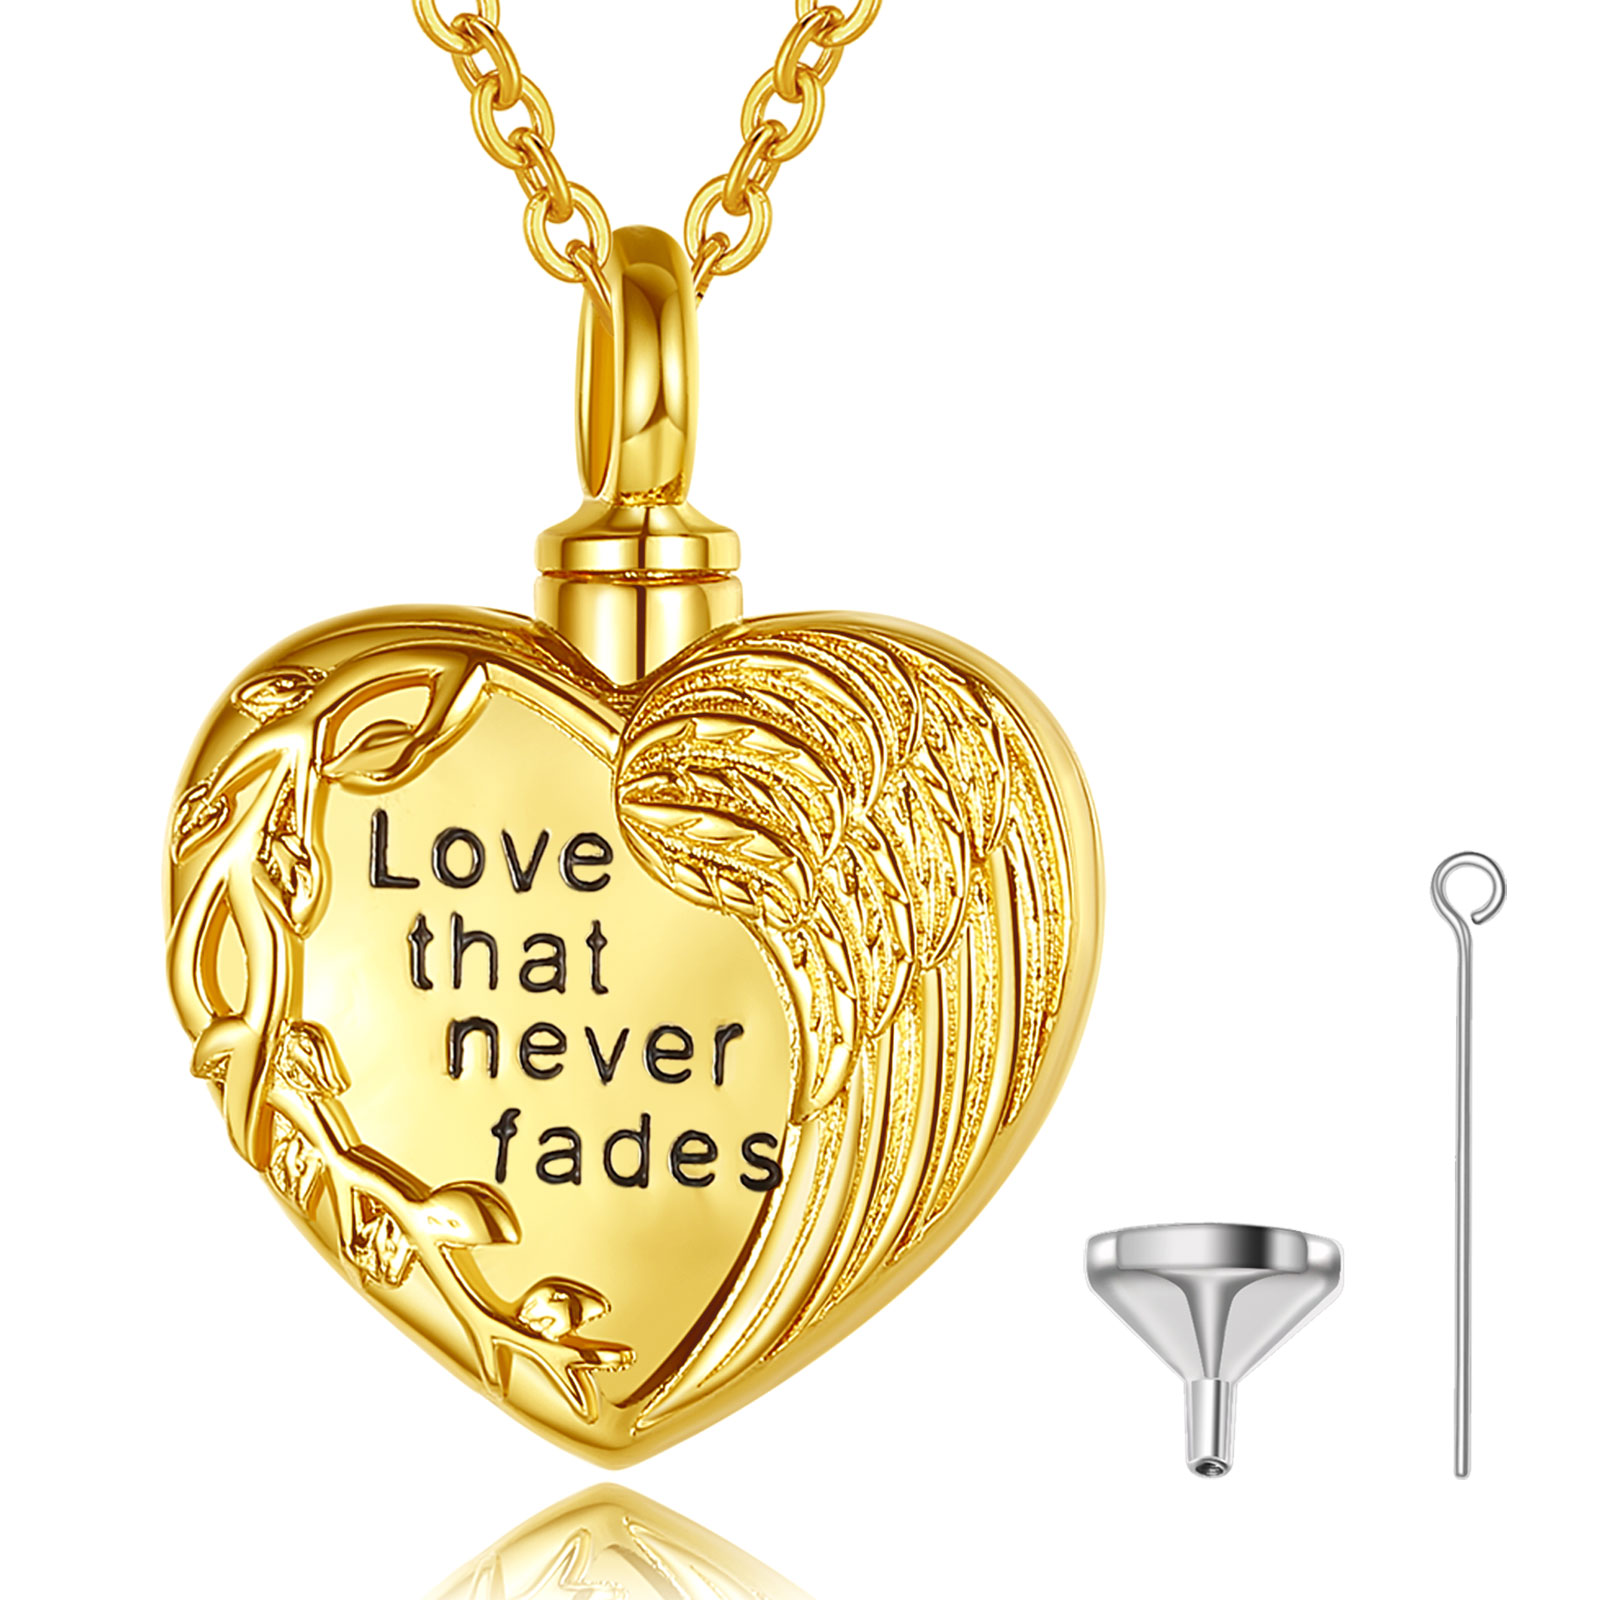 Merryshine Jewelry Wholesale Price Gold Plating Memorial Ash Urn Cremation Heart Pendant Necklace